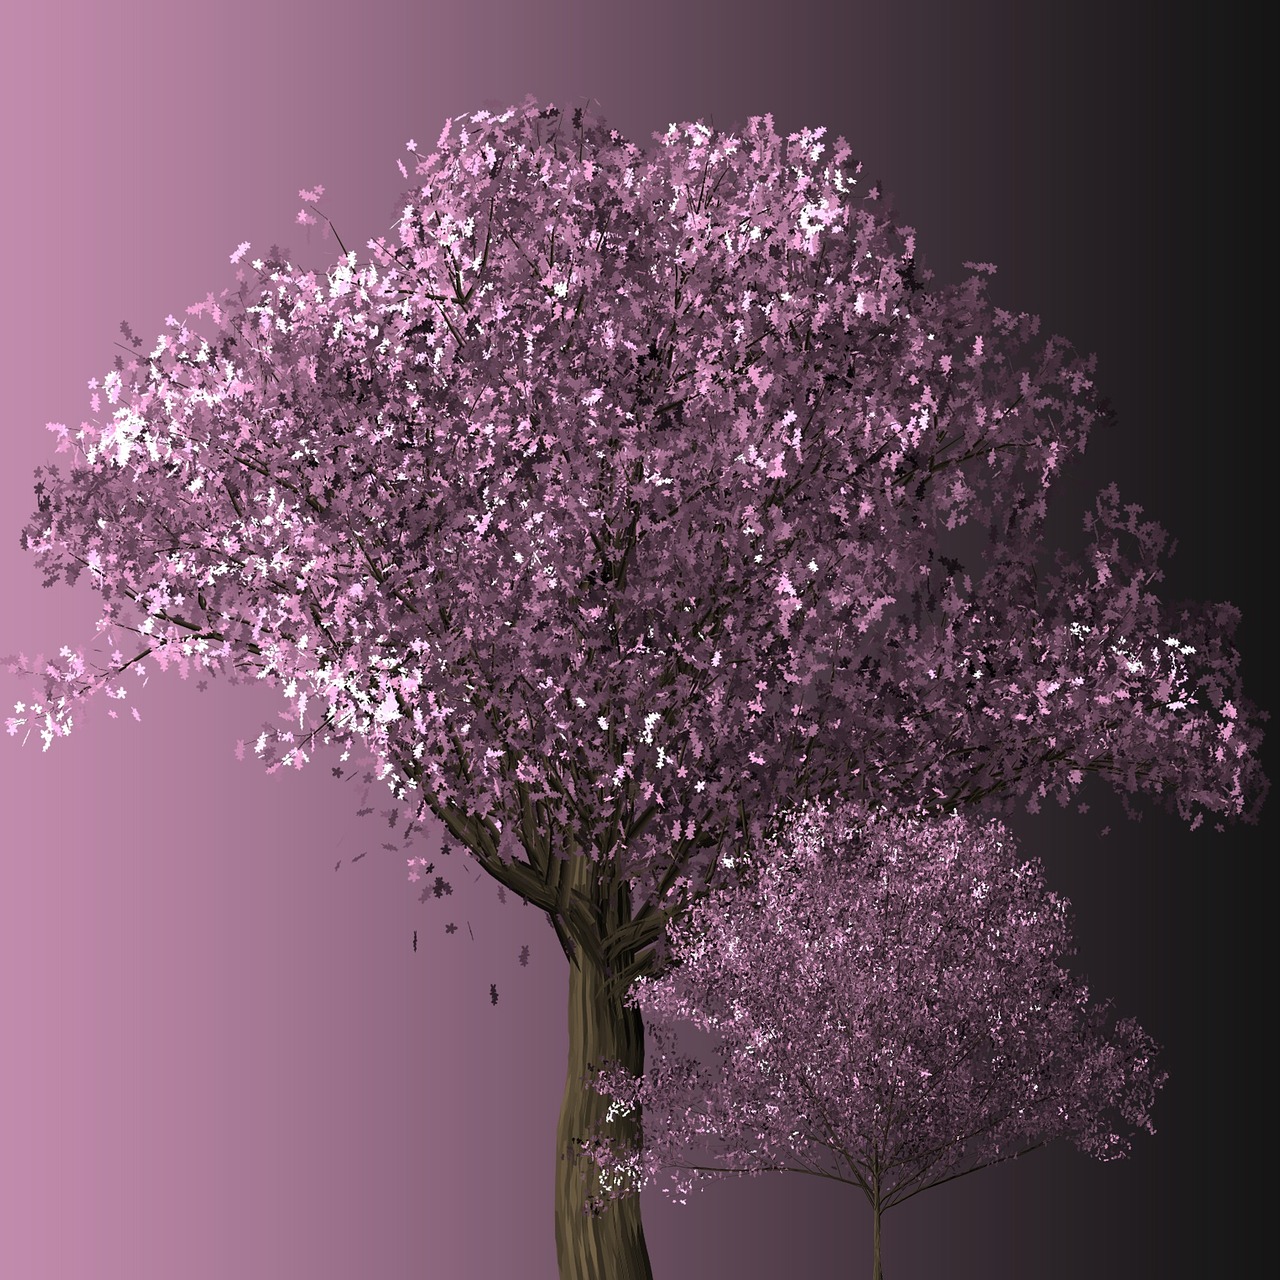 a couple of trees that are next to each other, a digital rendering, digital art, vortex of plum petals, very beautiful photo, finely detailed illustration, petal pink gradient scheme